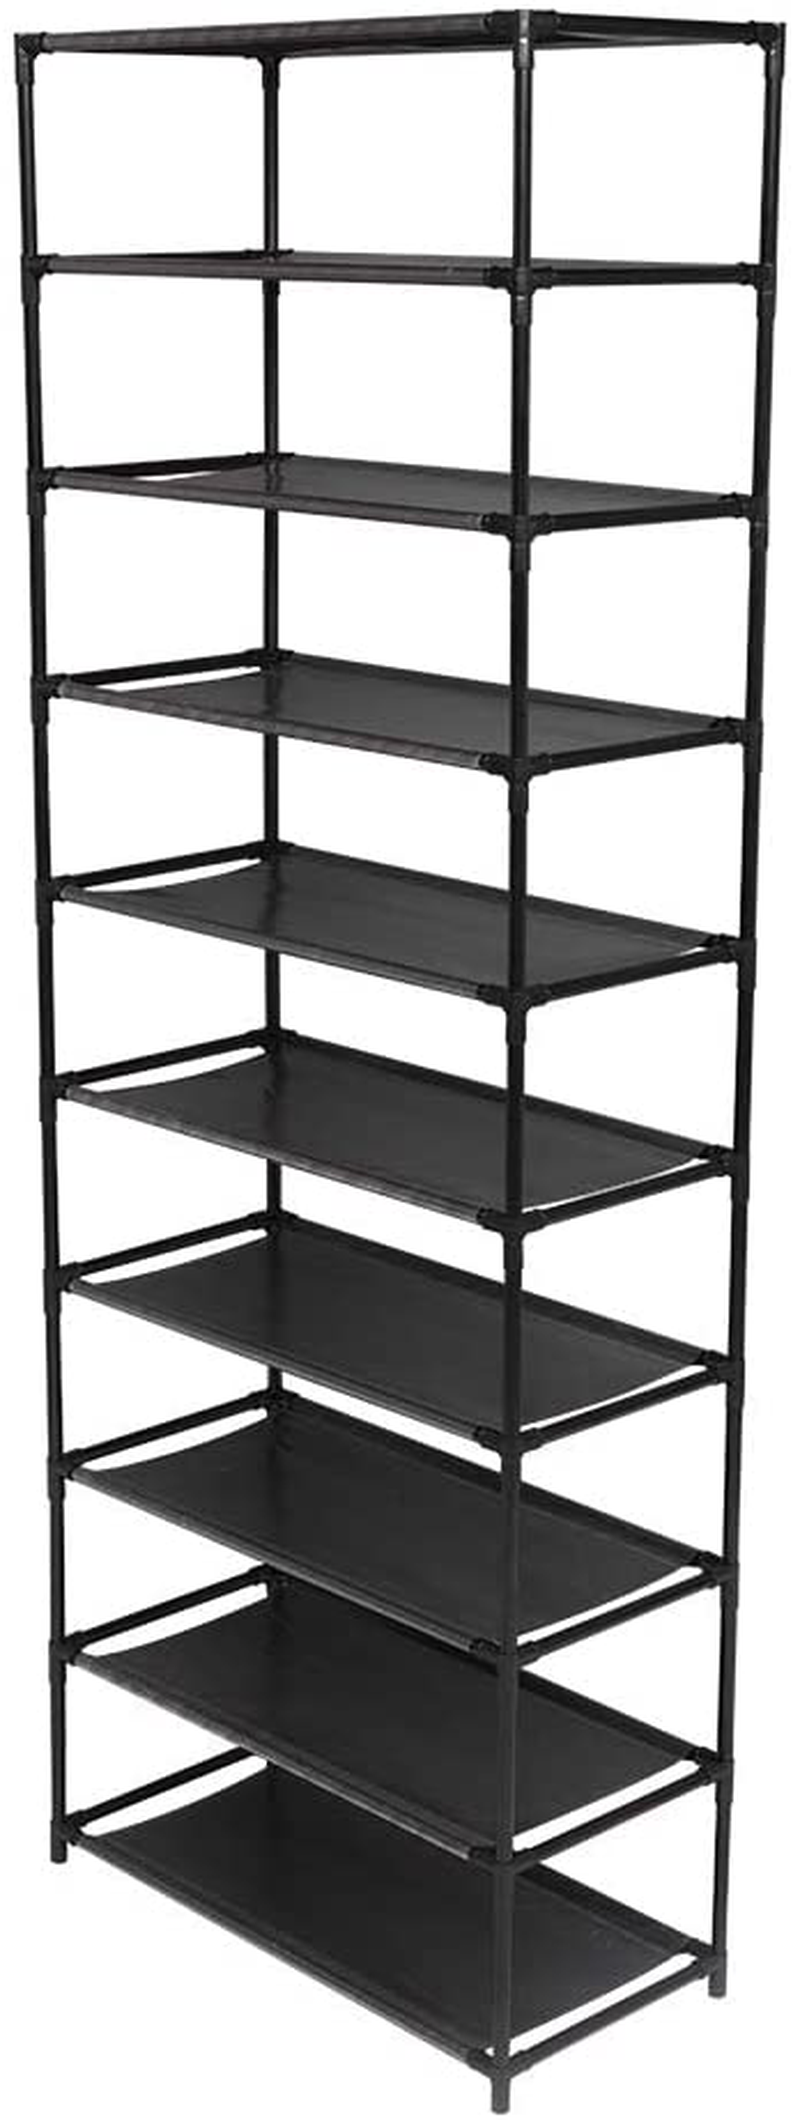 SLCSY 10 Tier Stackable Shoe Rack Storage Shelves - Stainless Steel Frame Holds 50 Pairs of Shoes